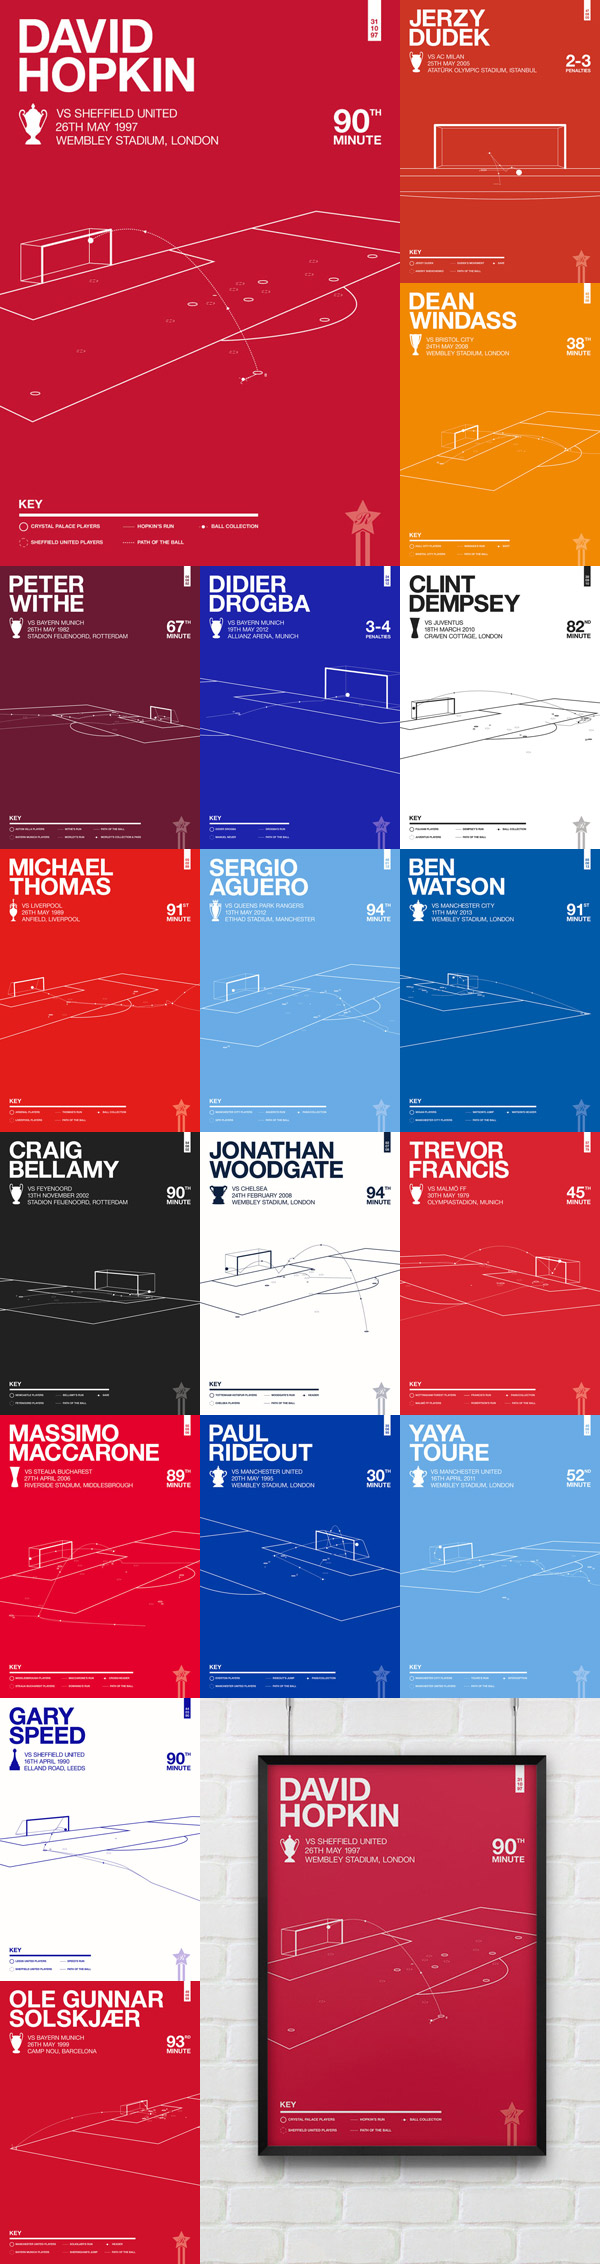 Collection of Graphic Prints for Iconic Football Moments - Created by Rick Hincks